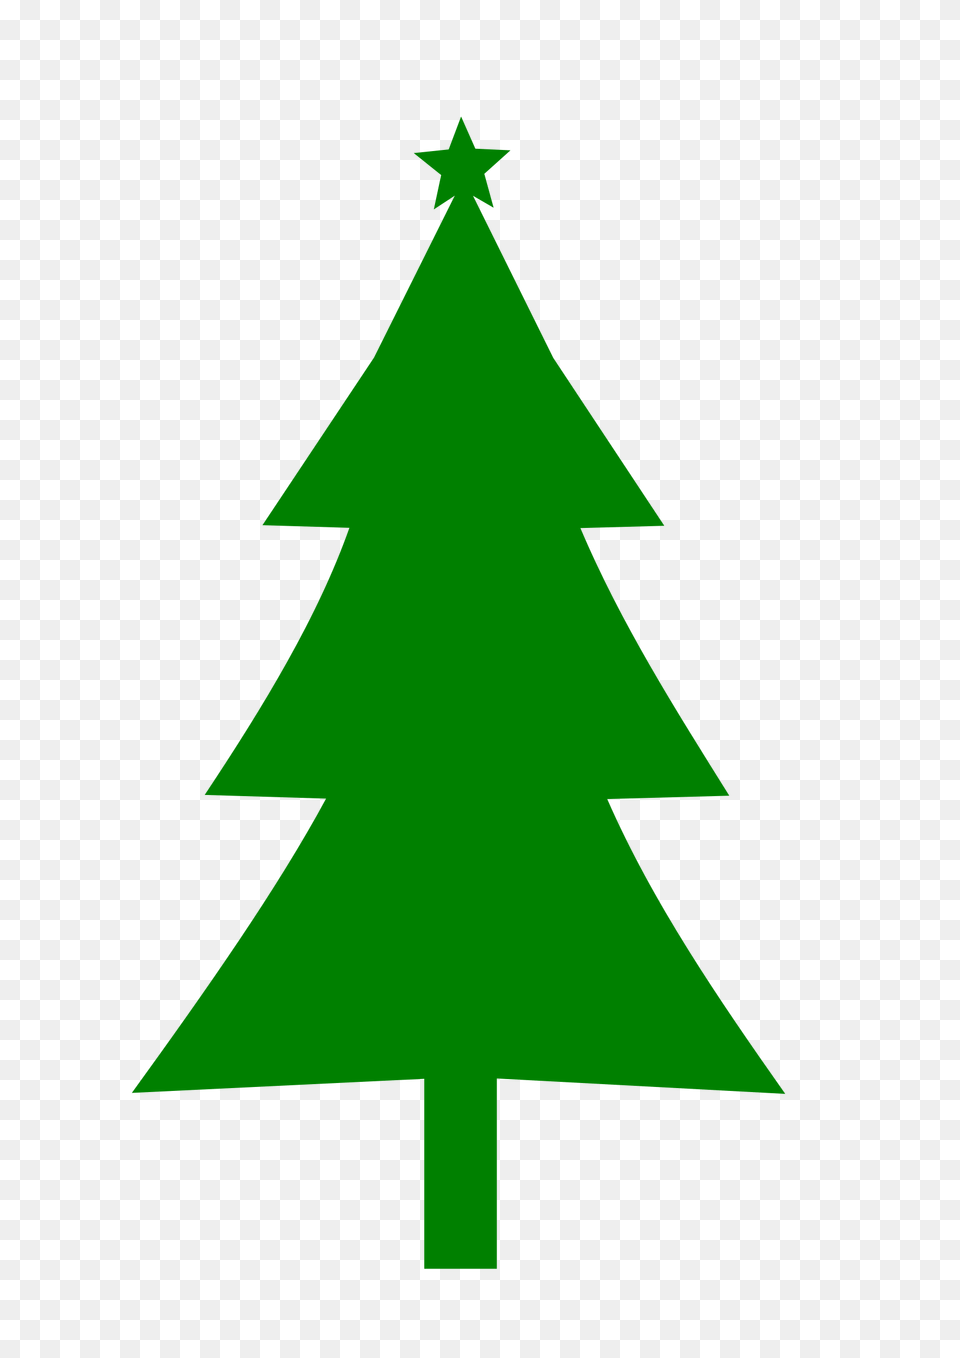 Evergreen Trees Silhouette Christmas Tree Clipart, Green, Christmas Decorations, Festival, Symbol Free Transparent Png